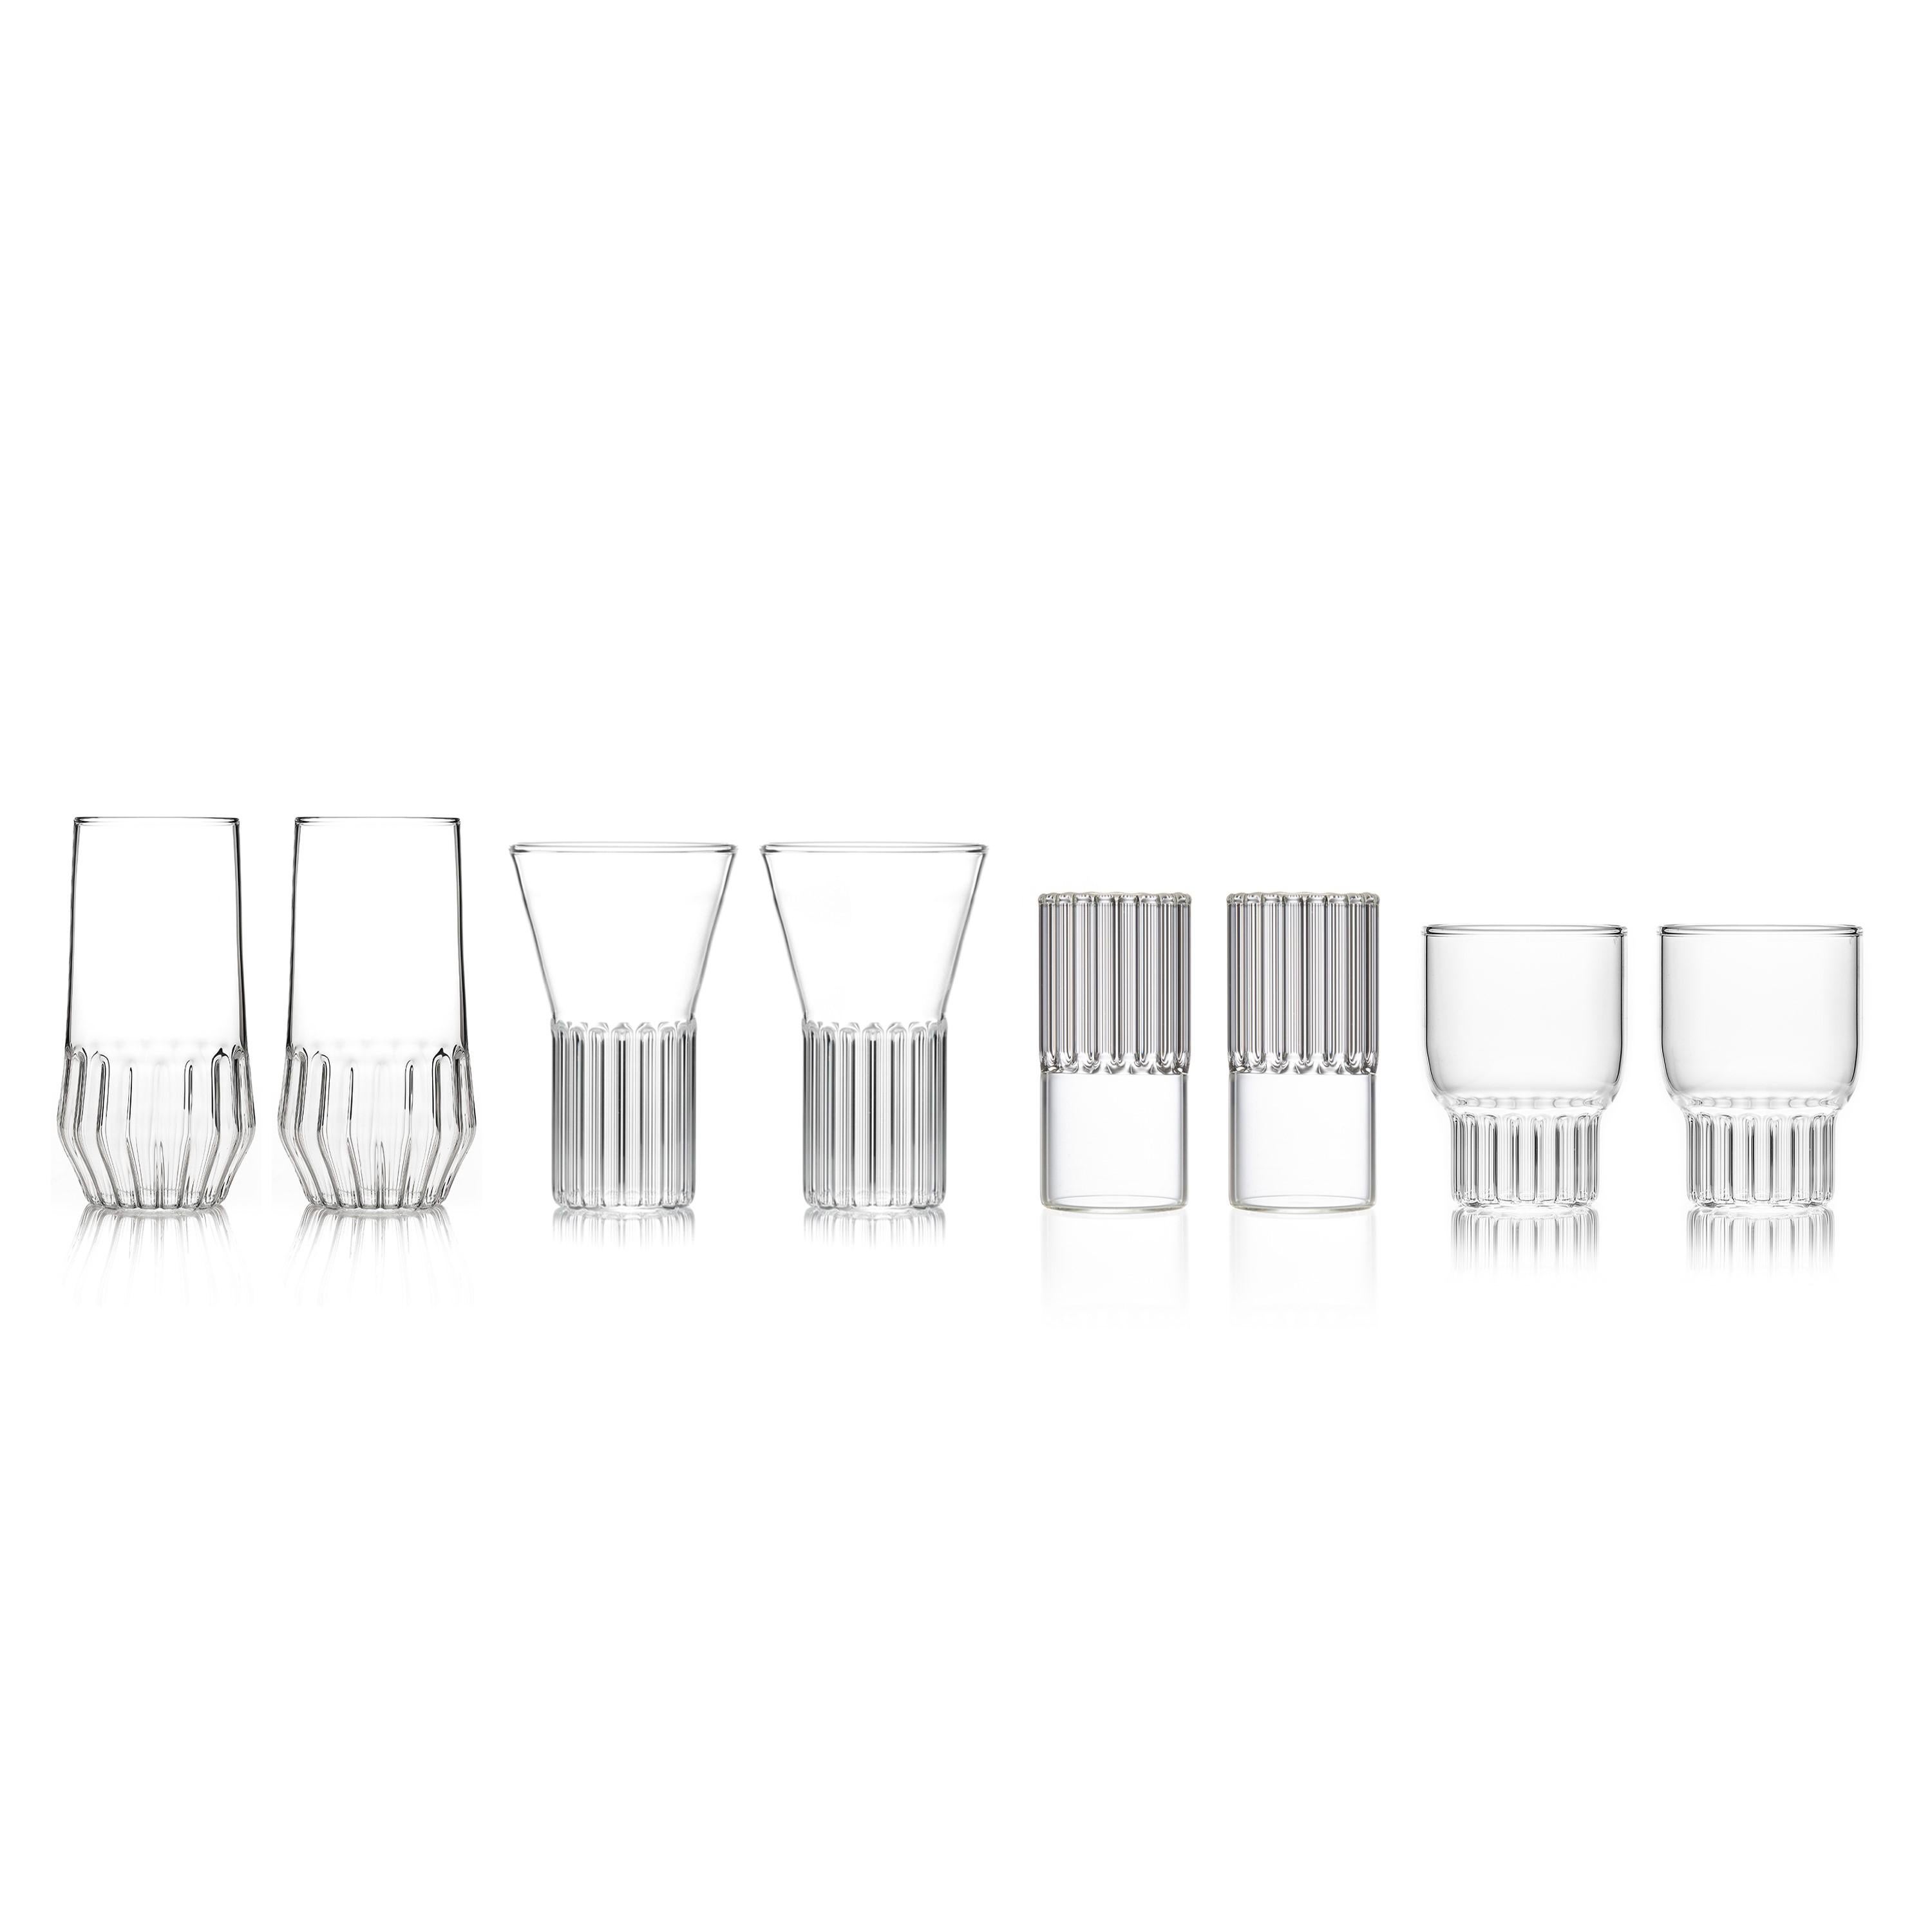 These espresso/liqueur glasses can be used to serve after-dinner liqueurs or coffee. These original espresso glasses are an original choice for design lovers. Inspired by the architectural parti diagram of Marina City Towers, the iconic